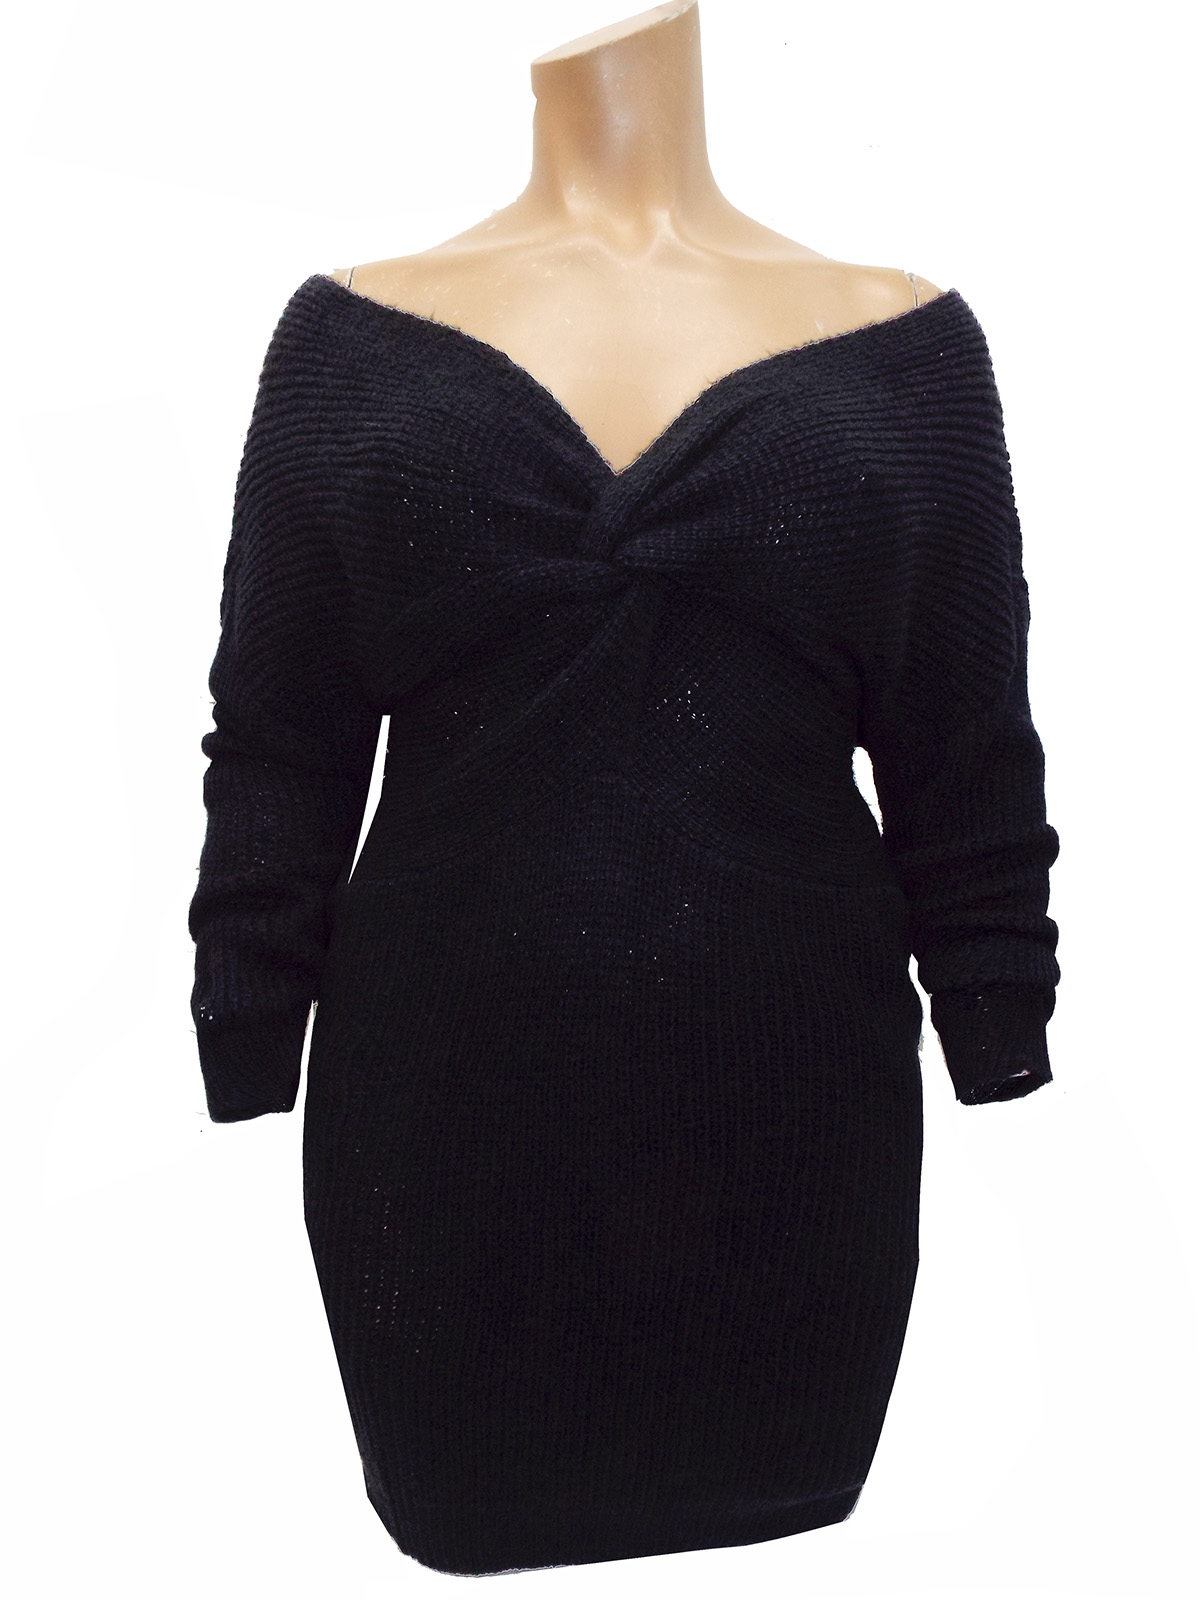 Missguided - - Missguided BLACK Sweeheart Twist Knitted Jumper Dress ...